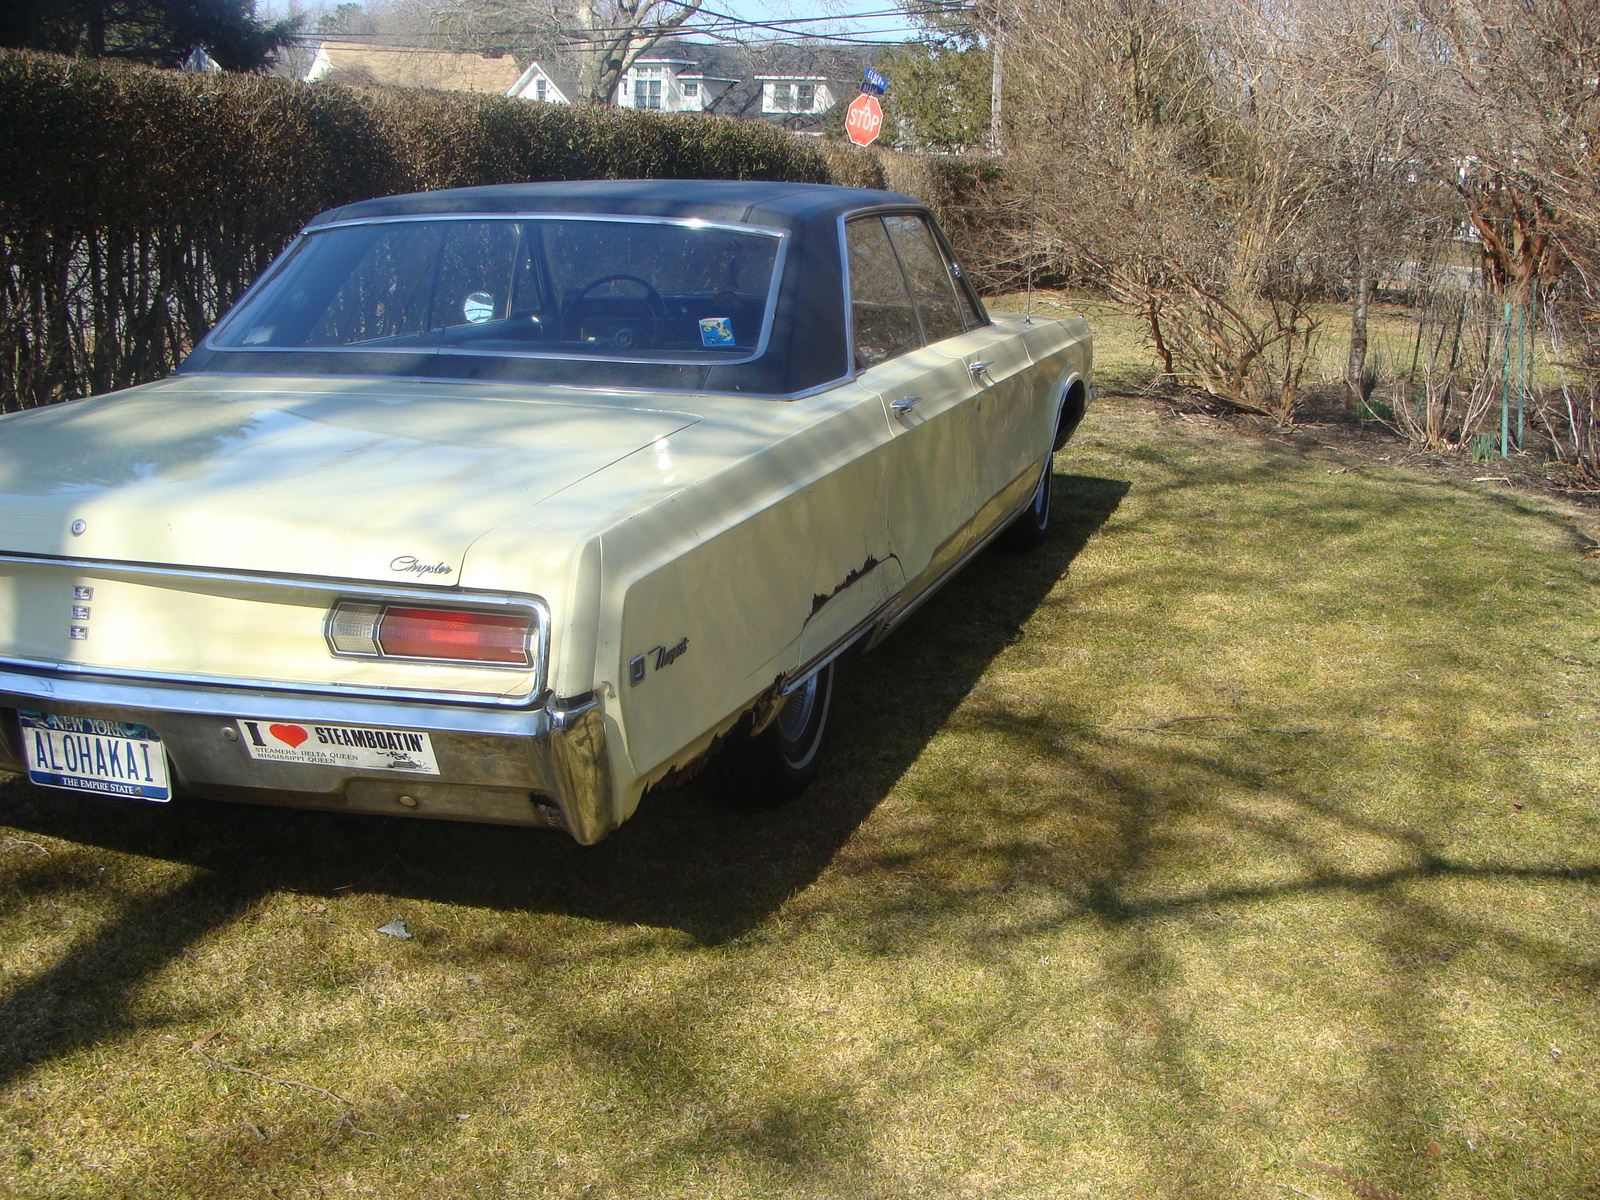 1968 Chrysler newport used parts #2